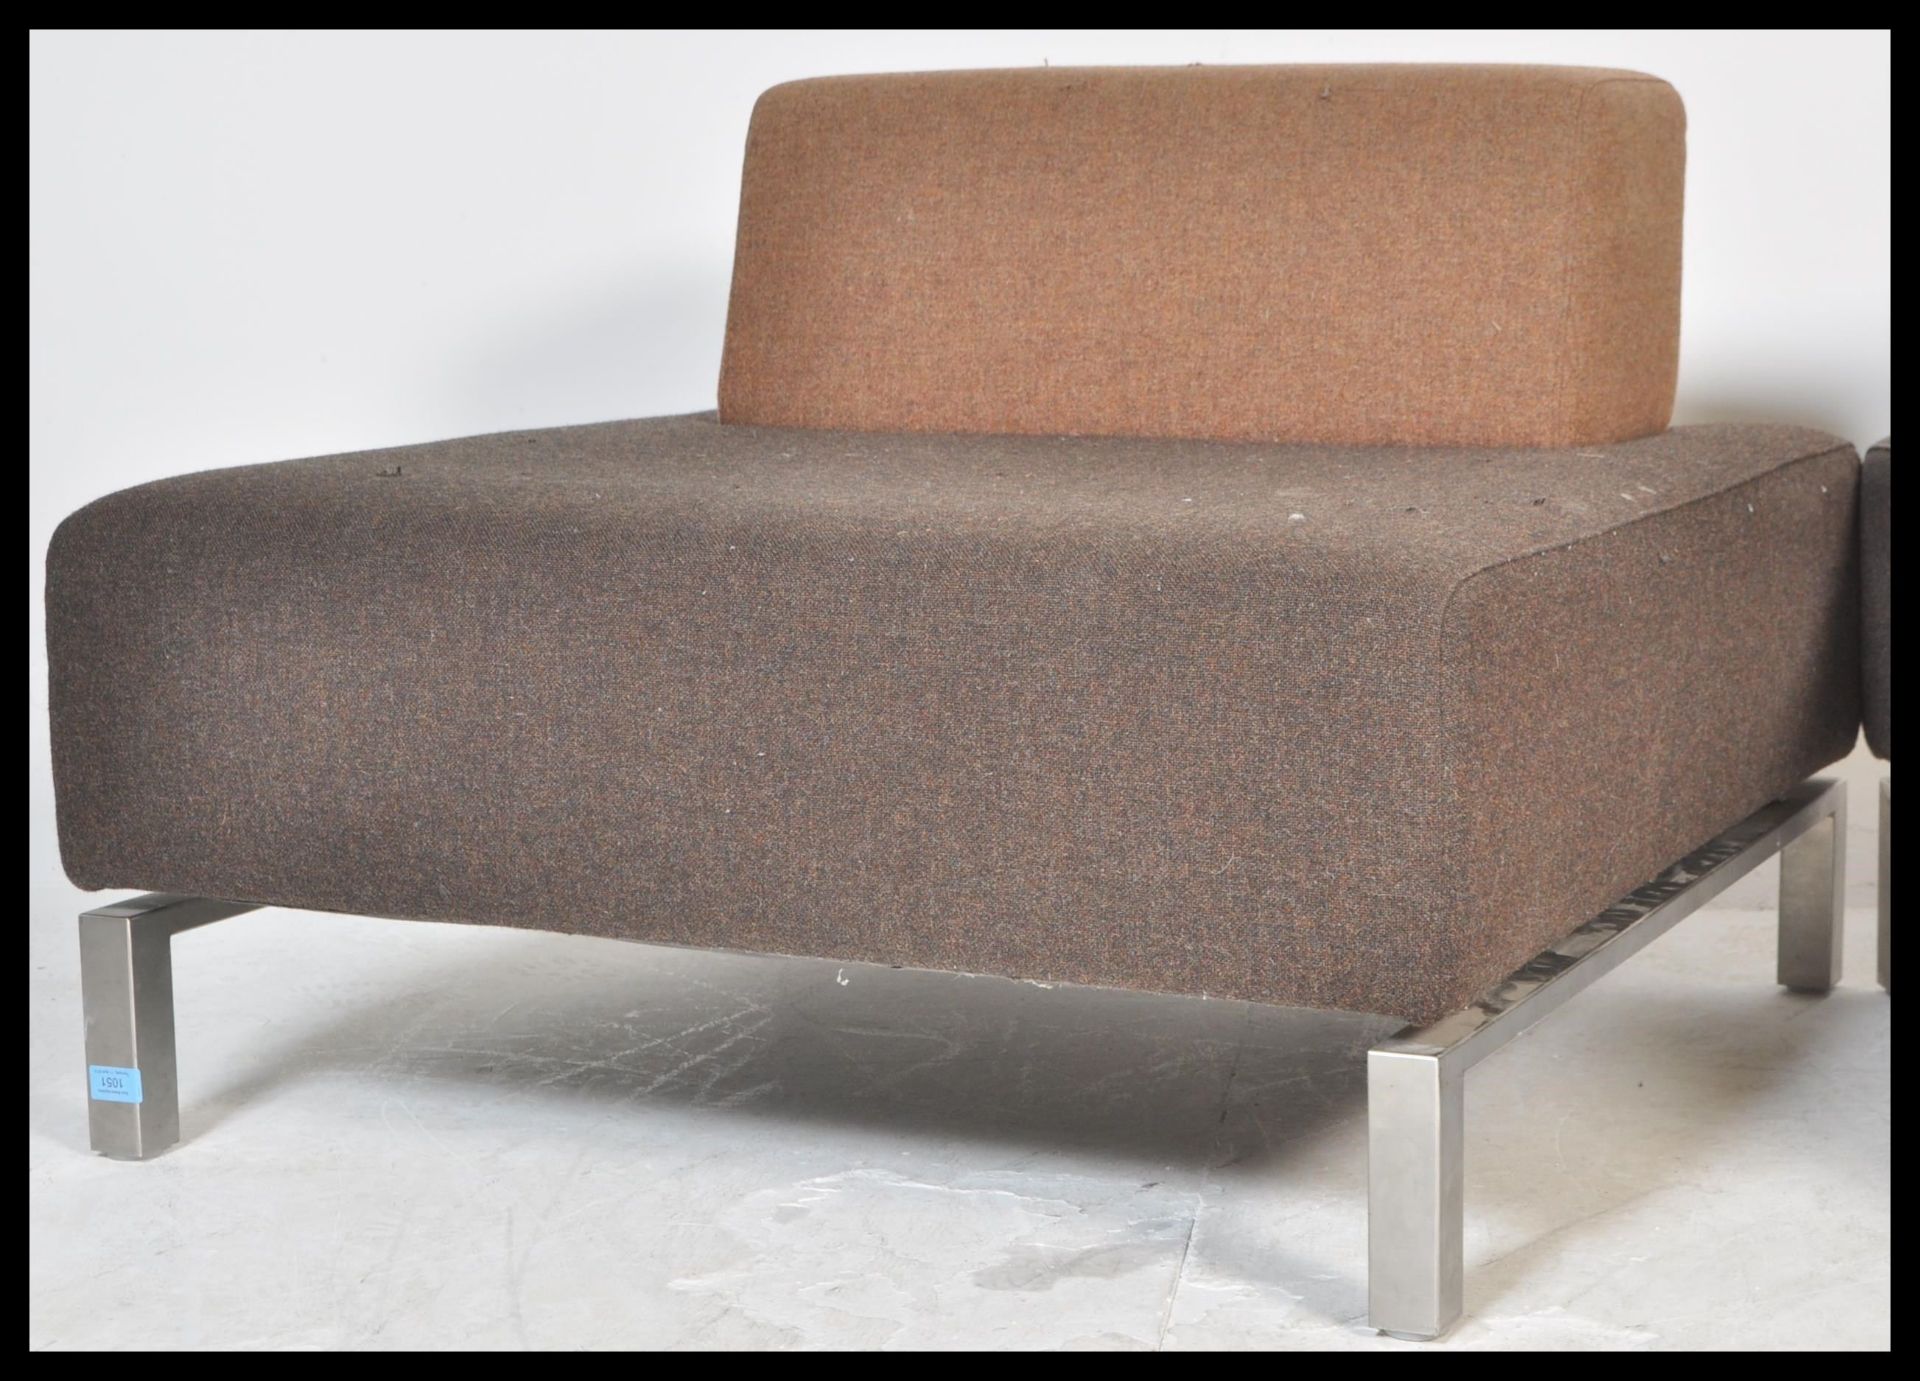 A pair of contemporary modern modular seating sofa / chairs in the manner of Orange Box furniture - Image 2 of 5